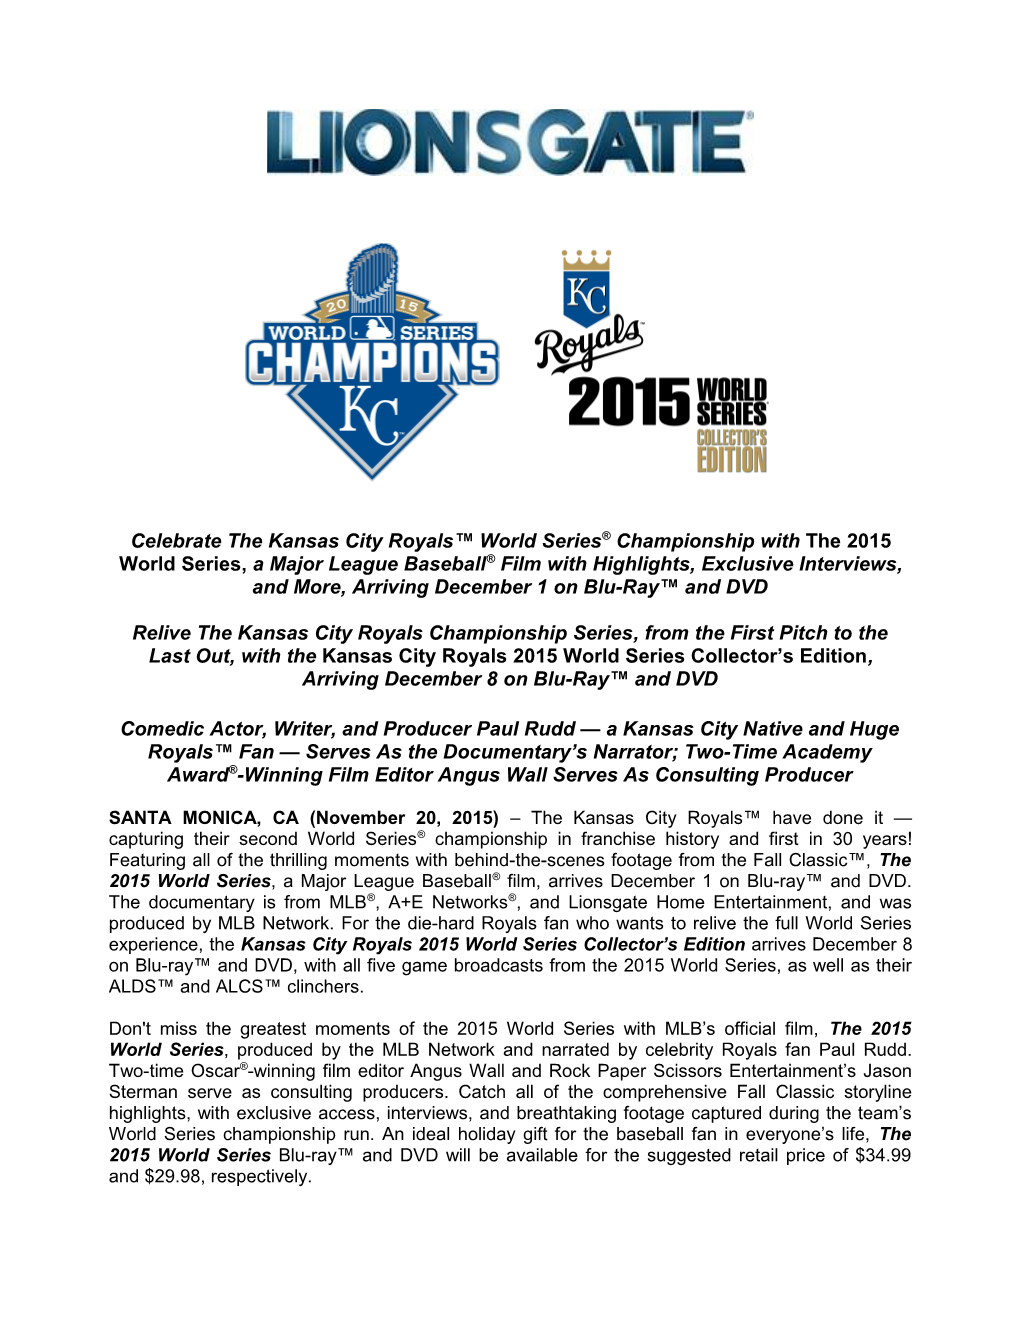 Celebrate the Kansas City Royals World Series Championship Withthe 2015 World Series,A